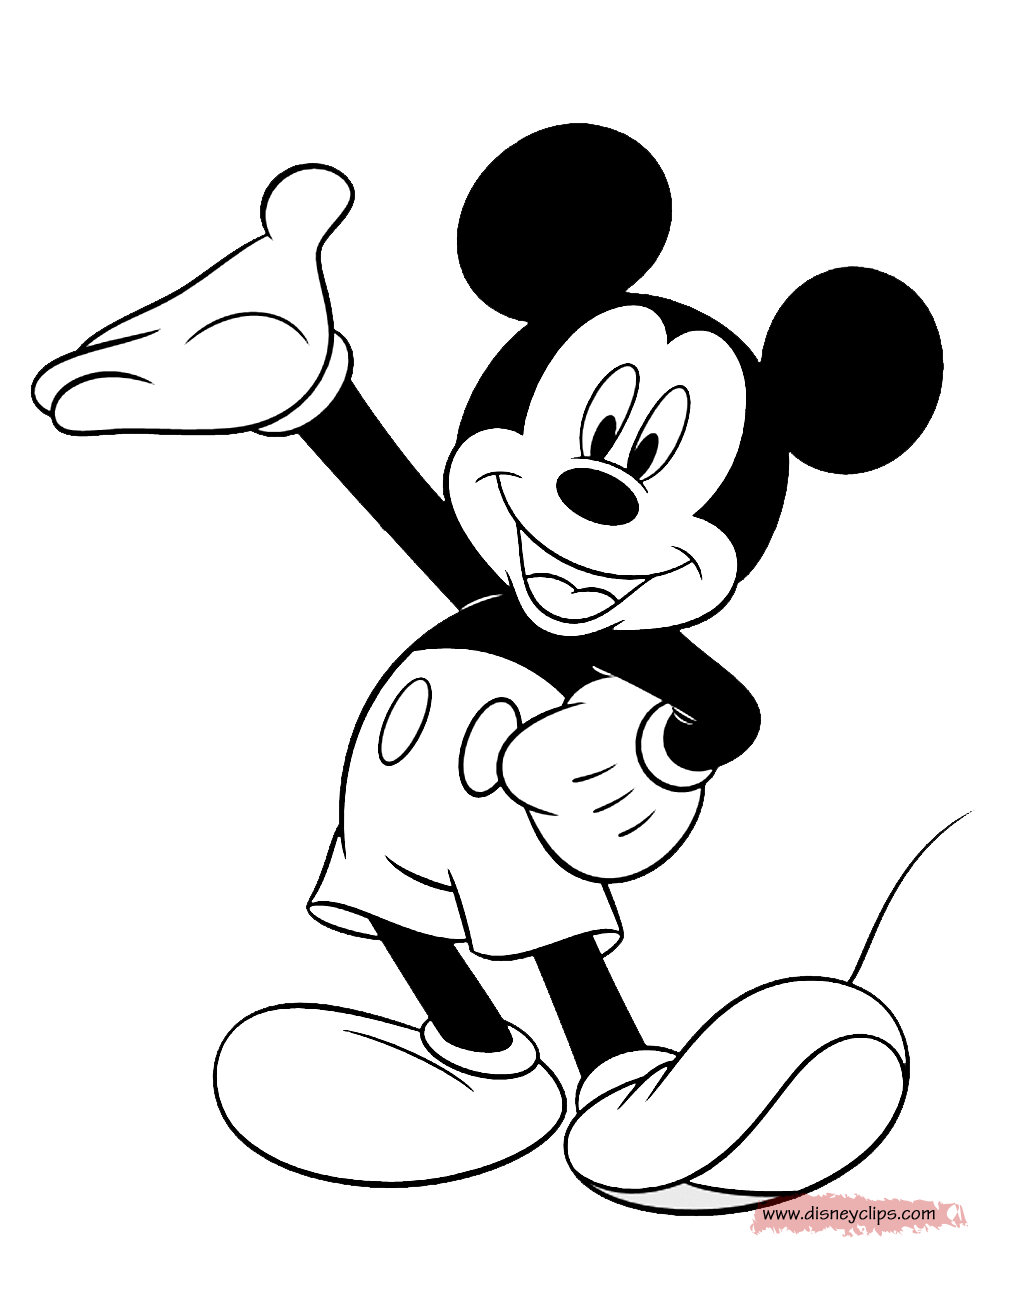 Mickey Mouse Coloring Pages 7 Disney s World Of Wonders